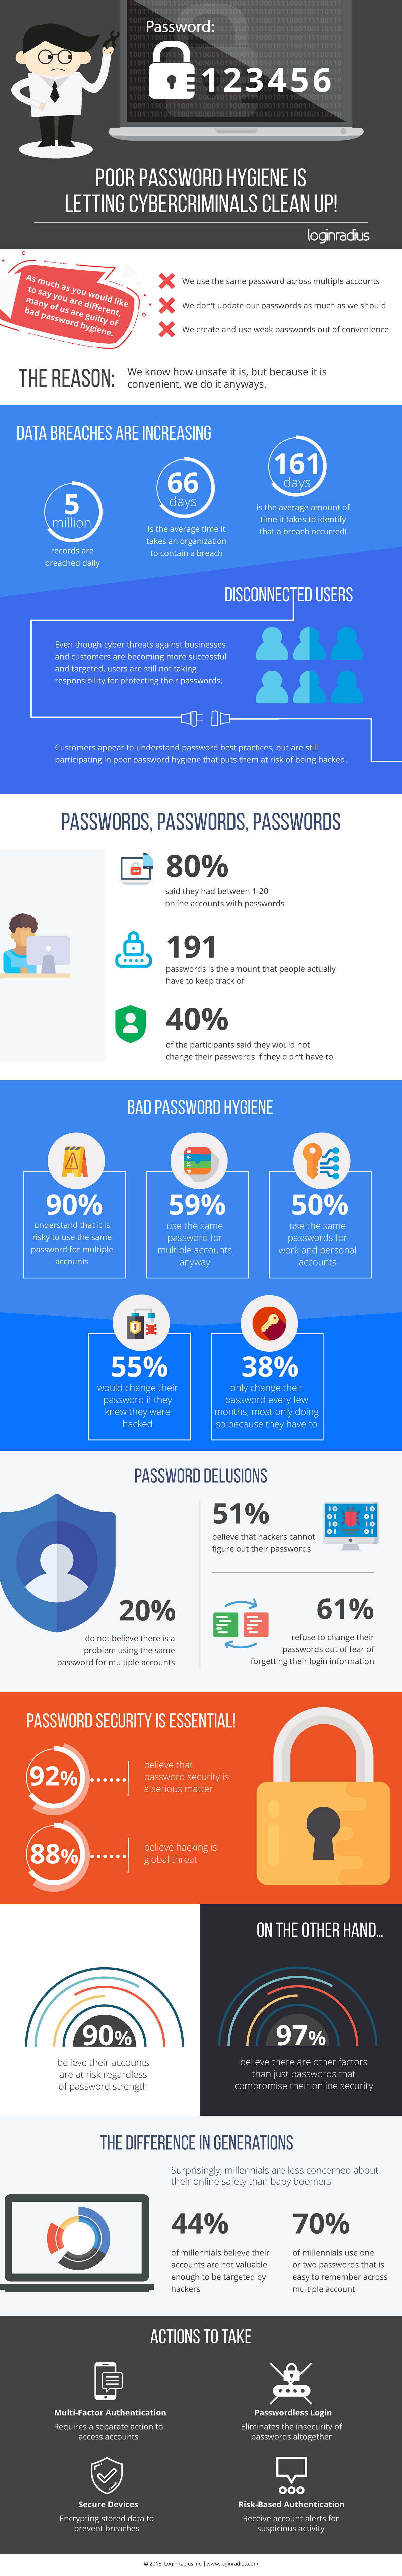 How Poor Password Hygiene is Letting Cybercriminals Clean Up